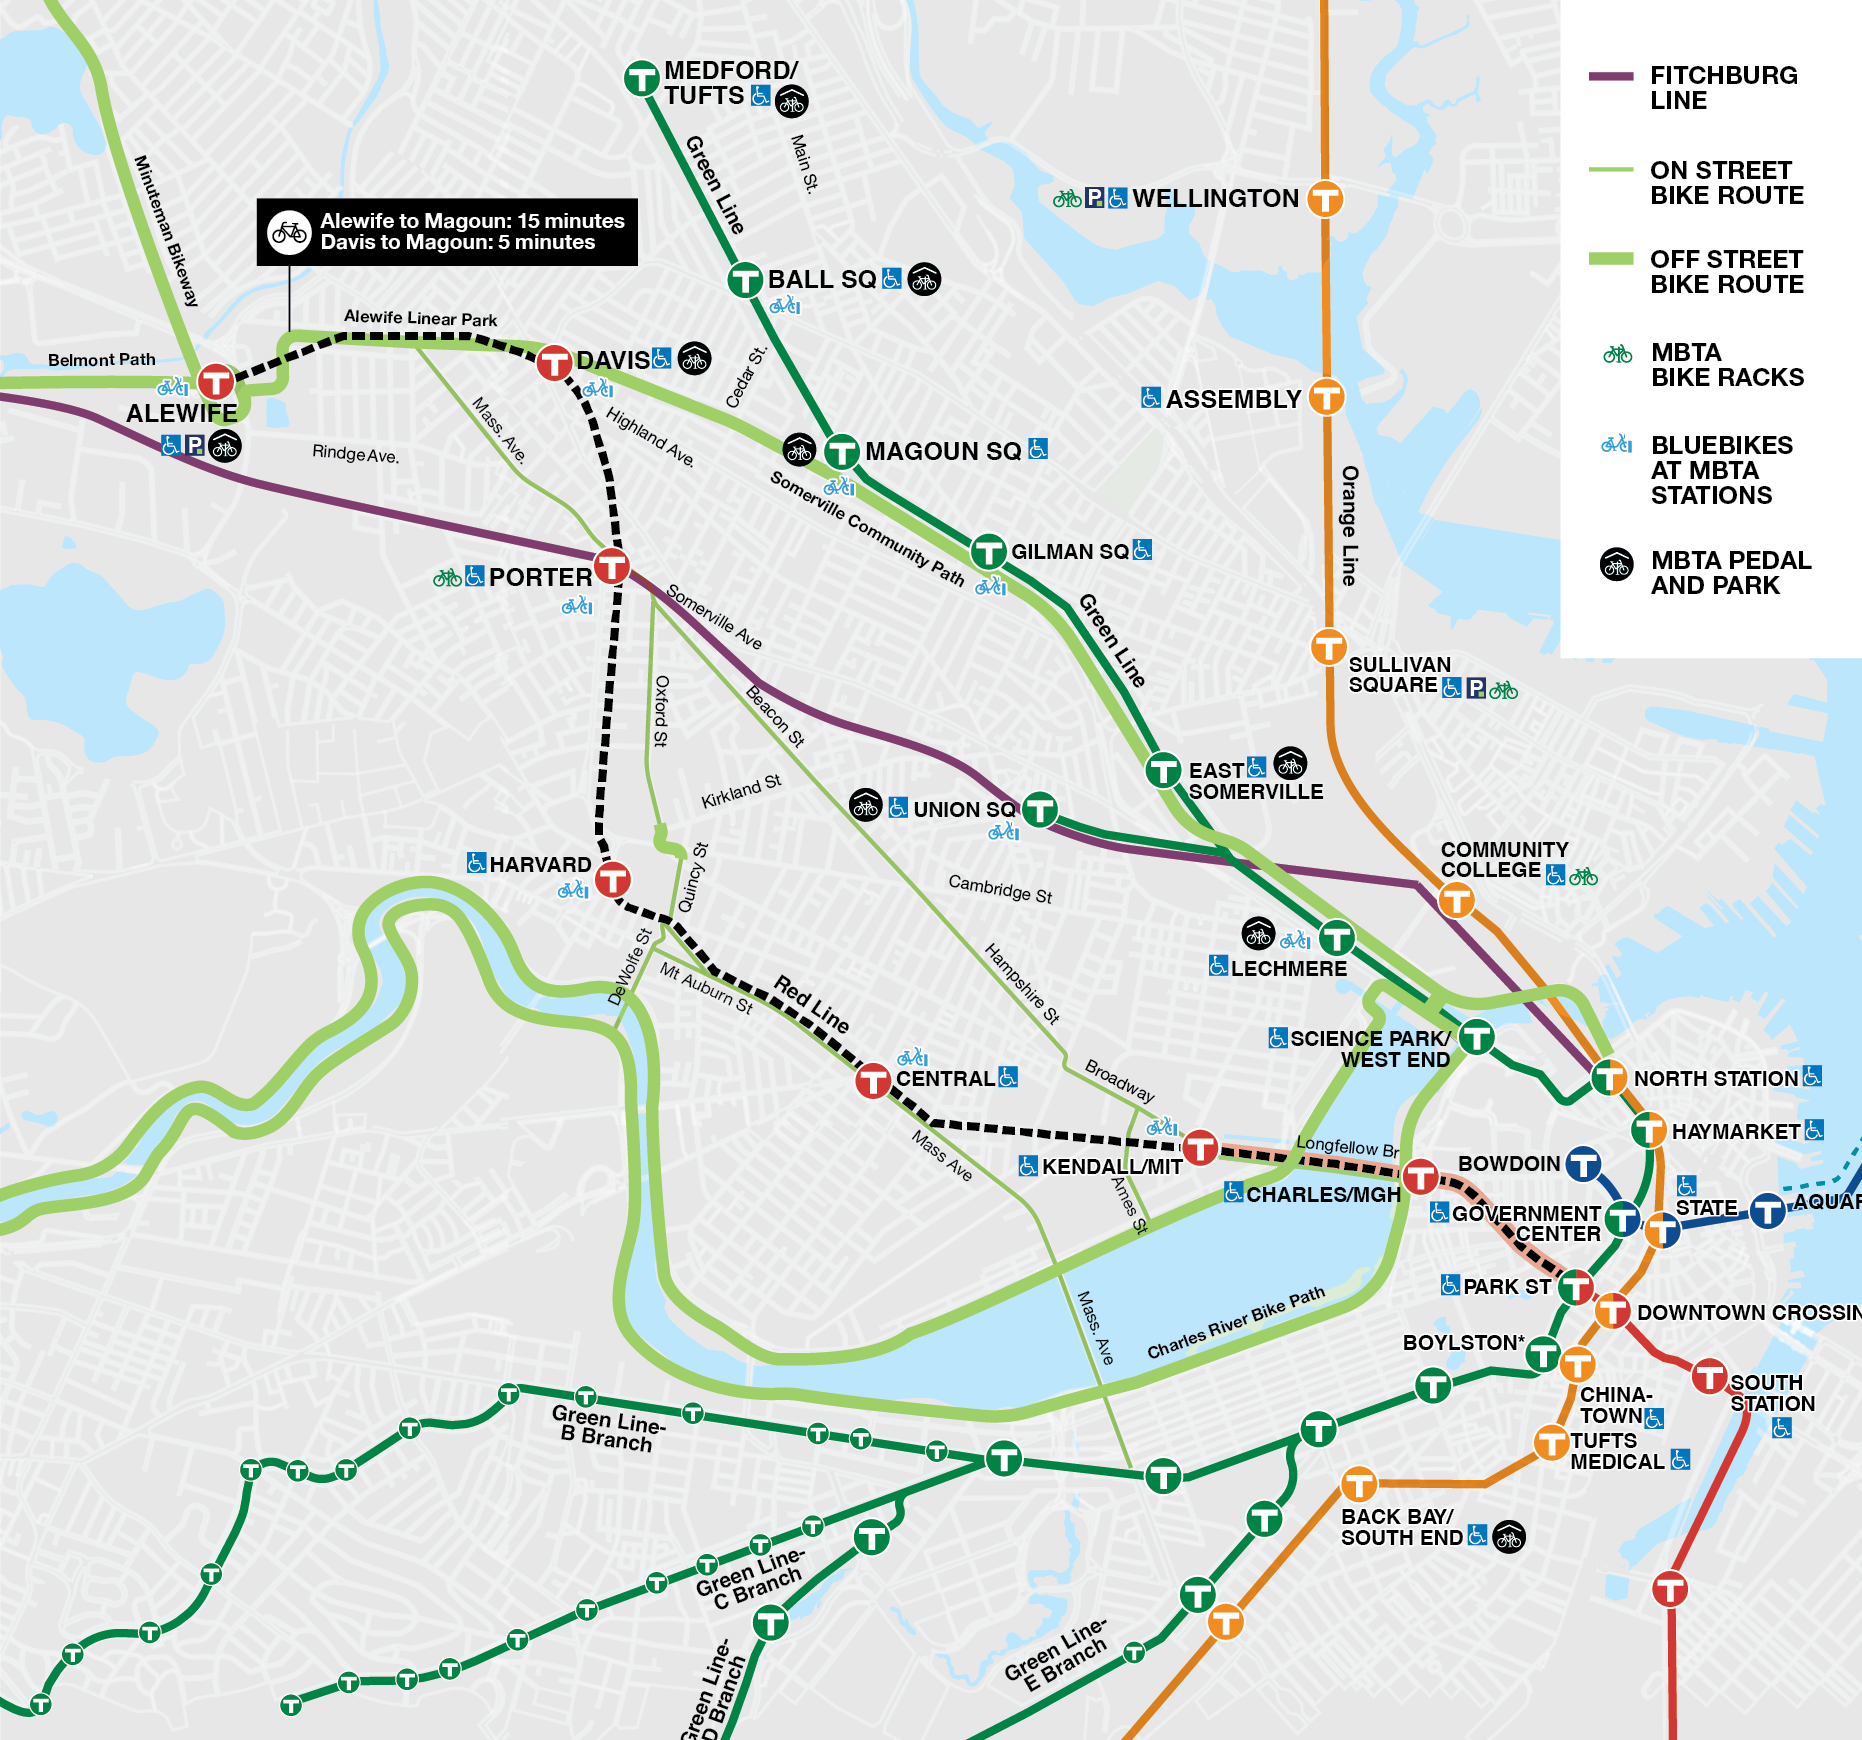 Diagram showing bike and Commuter Rail travel options during Red Line closure